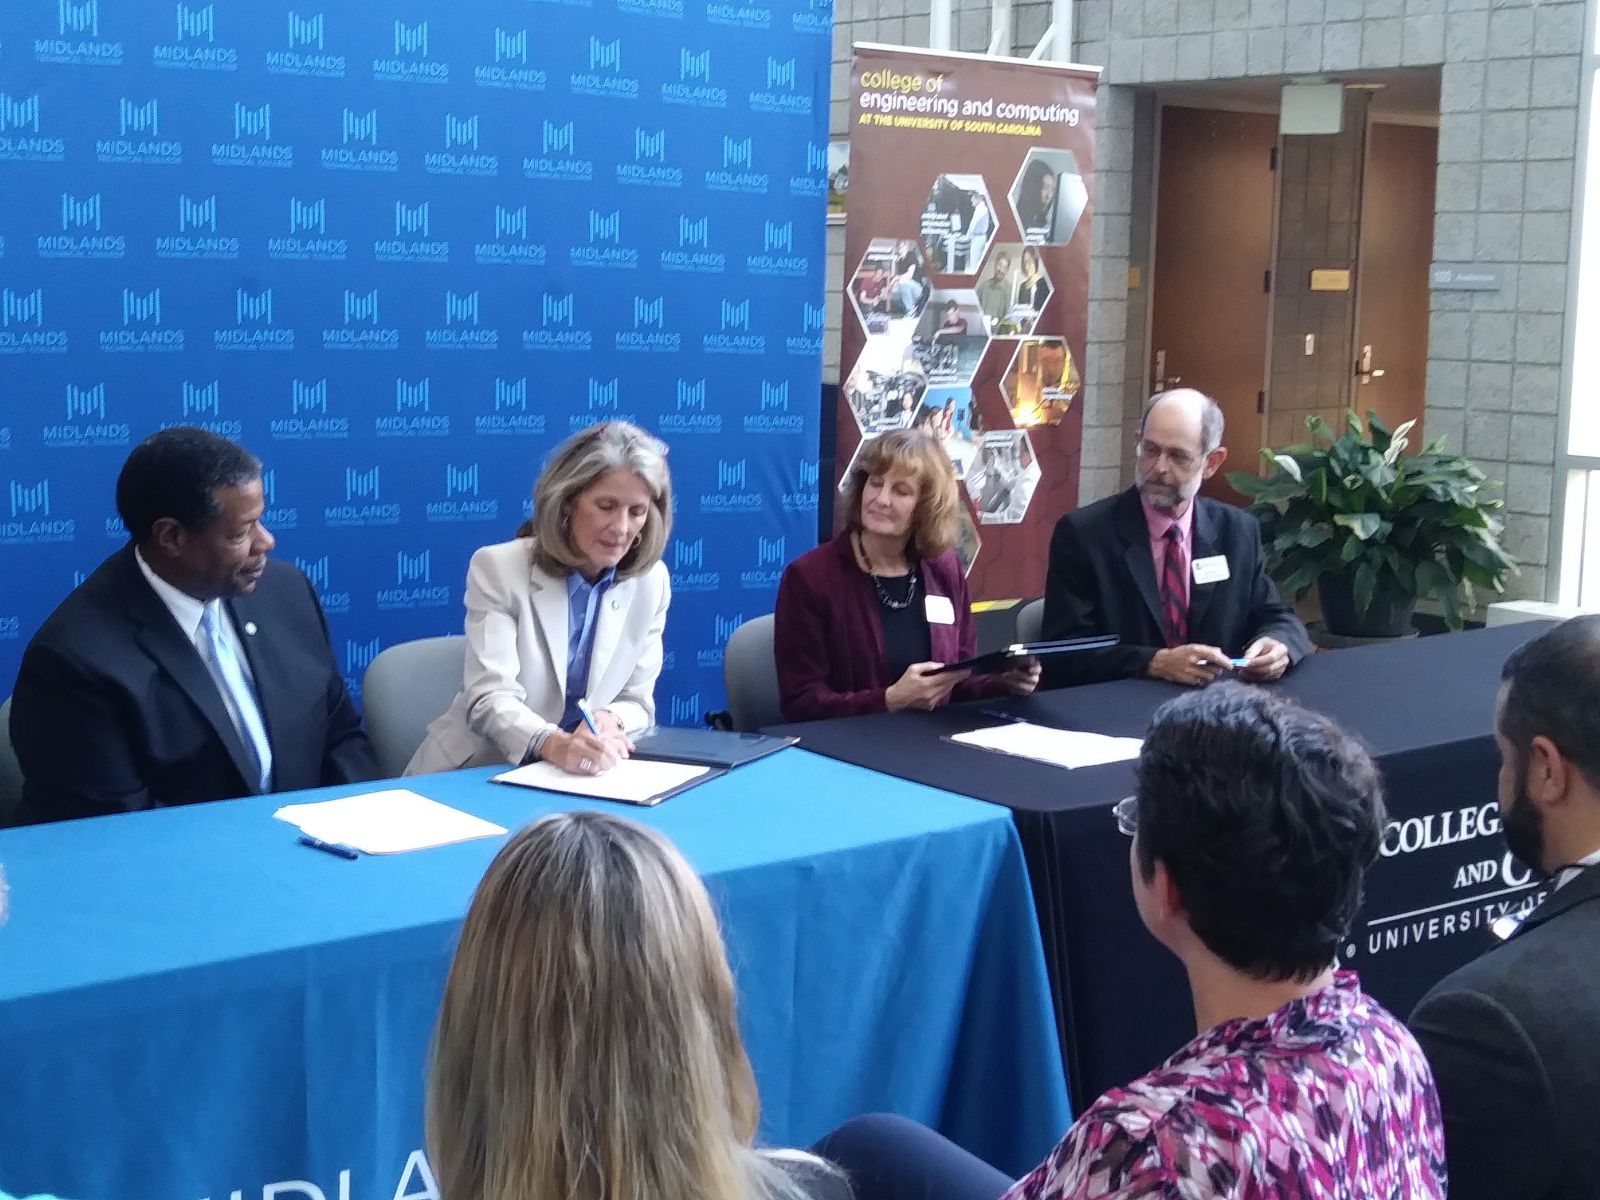 Midlands Technical College President Ronald Rhames (from left) and provost Barrie Kirk; Sandra Kelly, vice provost and dean of undergraduate students at the University of South Carolina; and Jed Lyons, associate dean of academic affairs at USC, sign a transfer agreement. (Photo/Travis Boland)